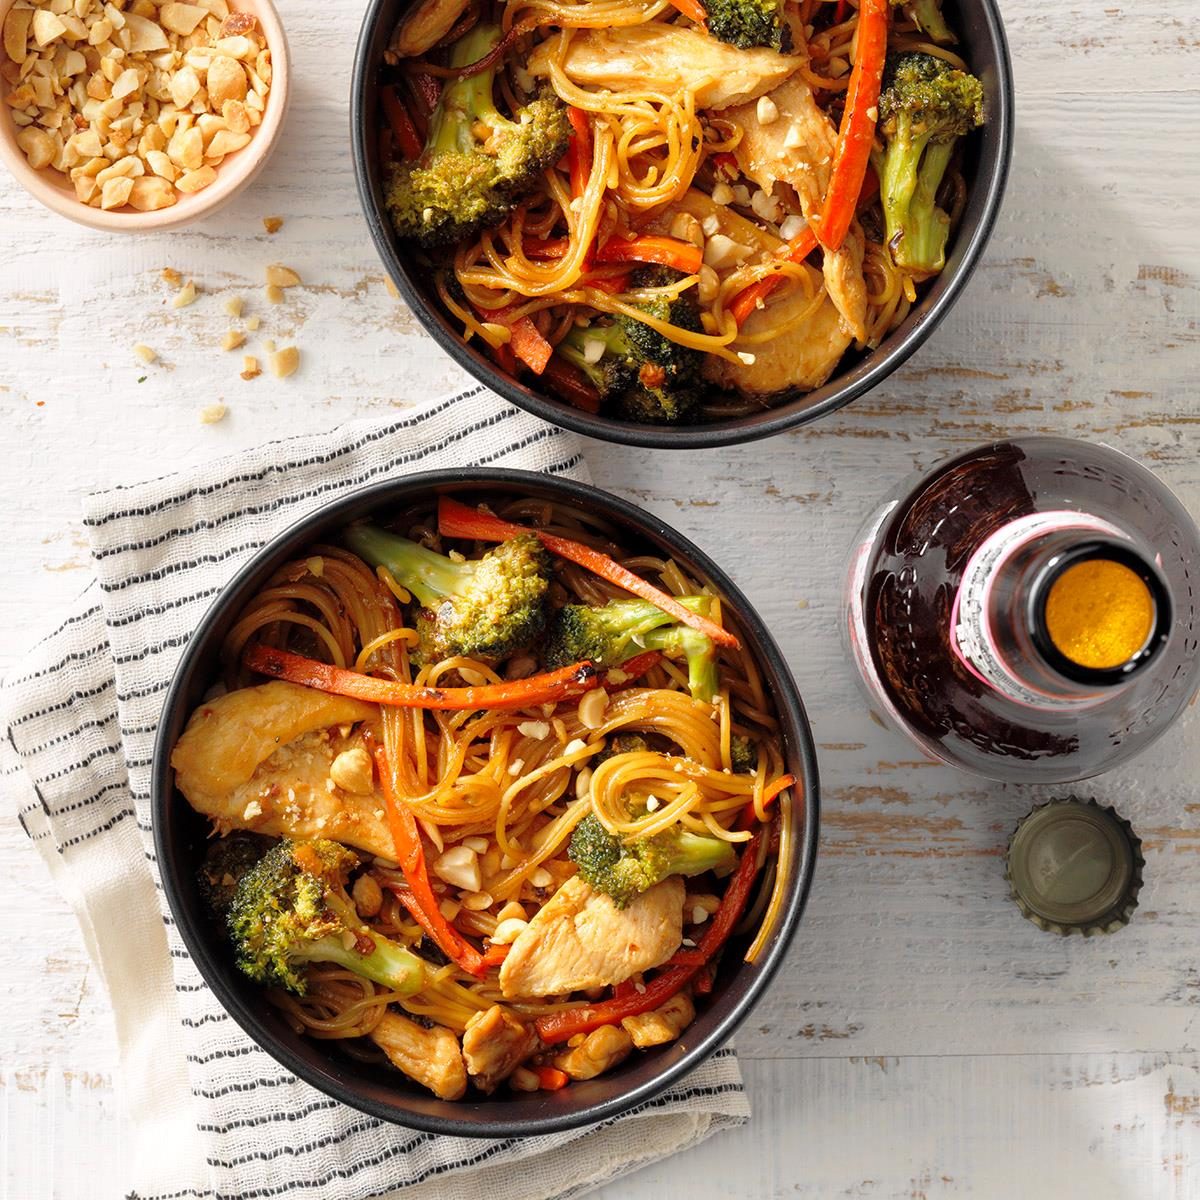 The Best Outdoor Wok Burners for Restaurant-Style Stir-Fries